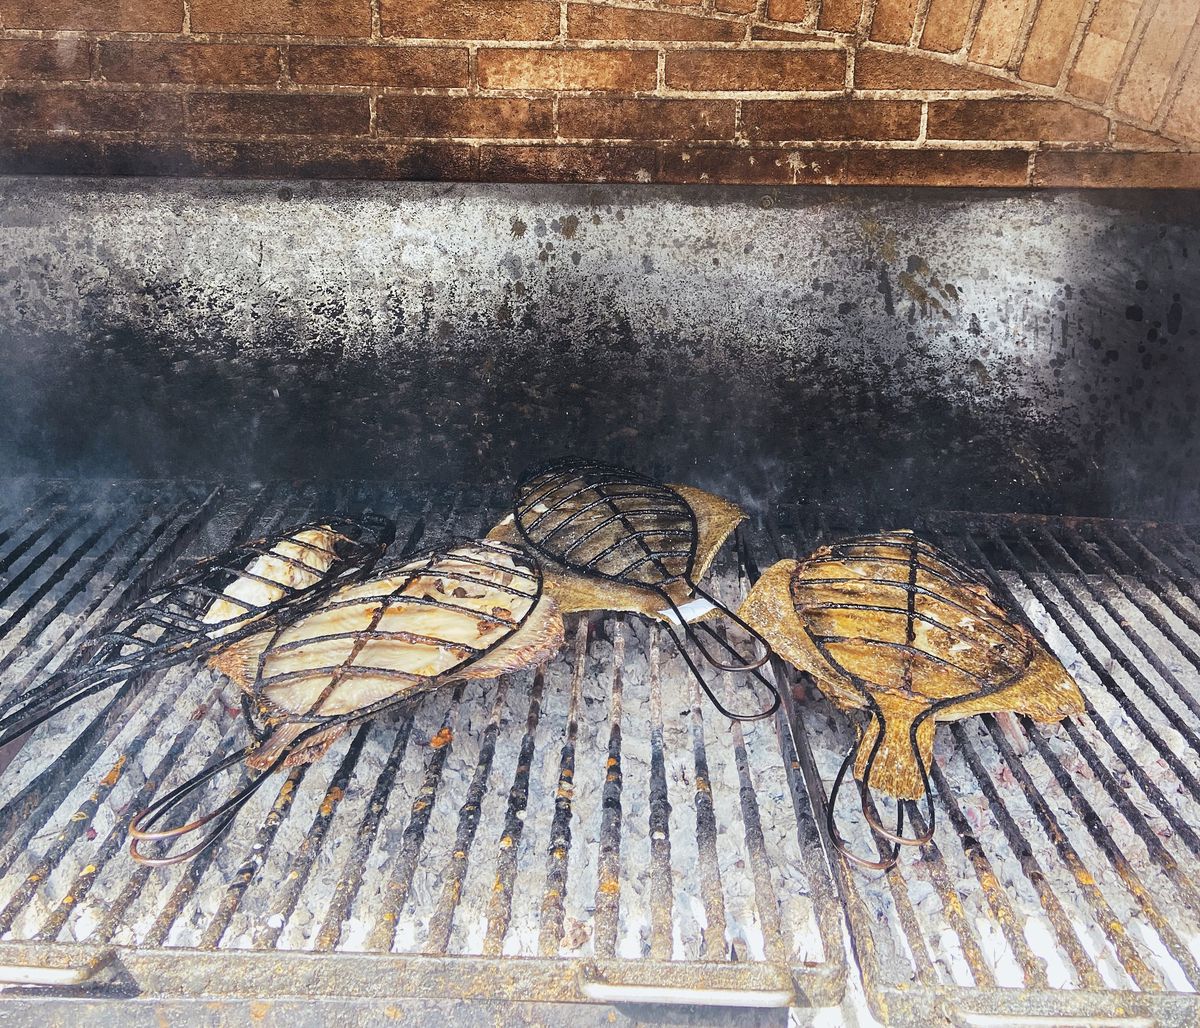 Large turbot on an outdoor grill